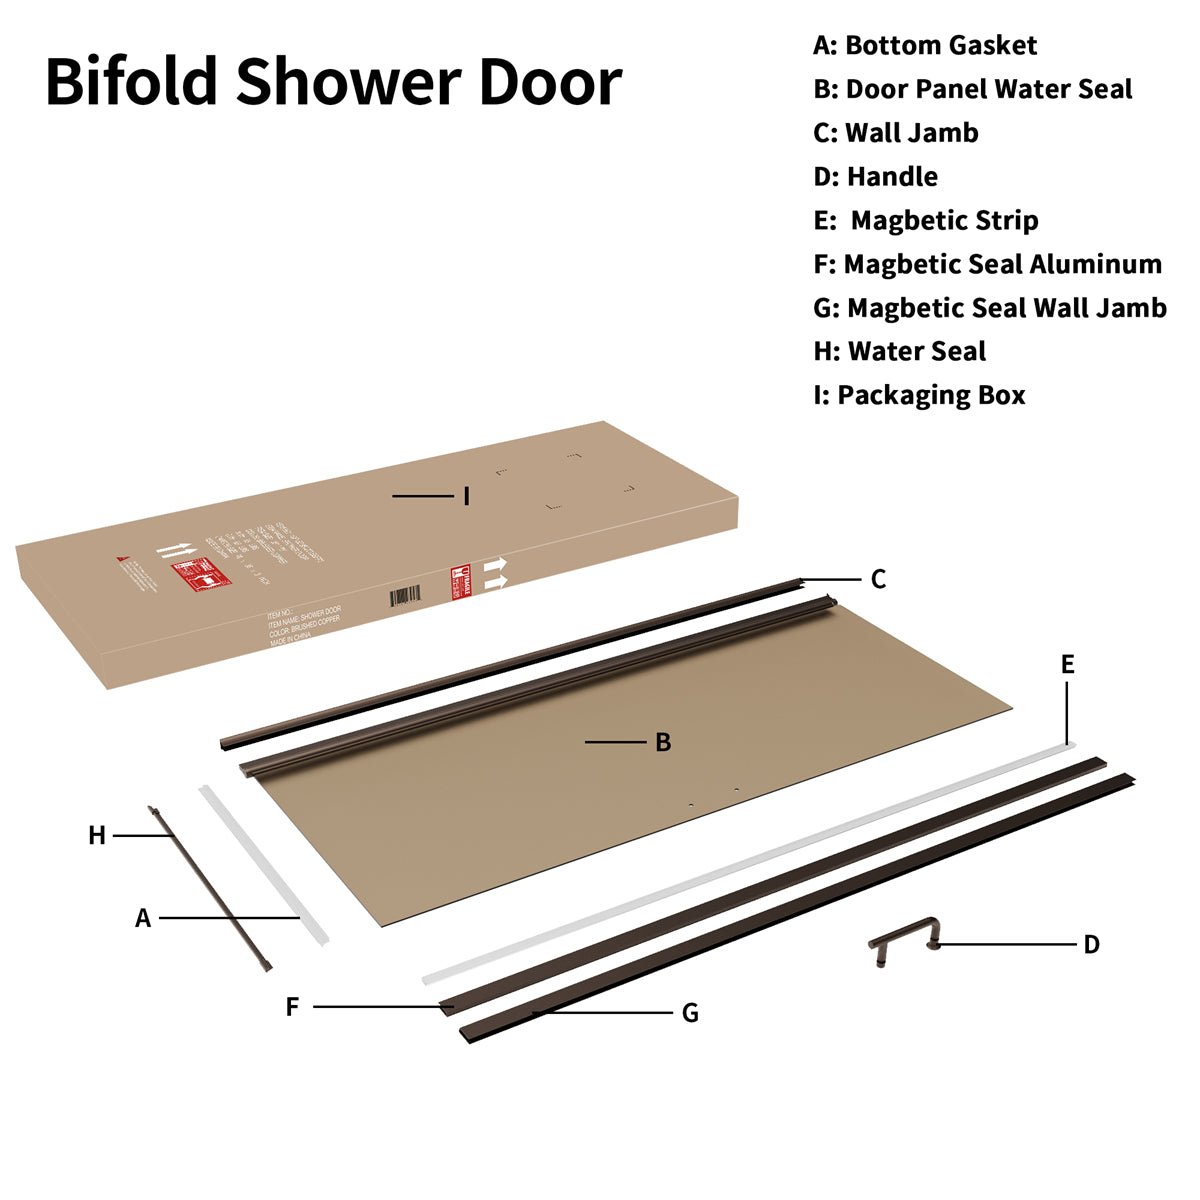 Chic 36" x 72" Pivot Frameless Shower Door,Tempered Clear Glass,Amber Color,Bronze Finish